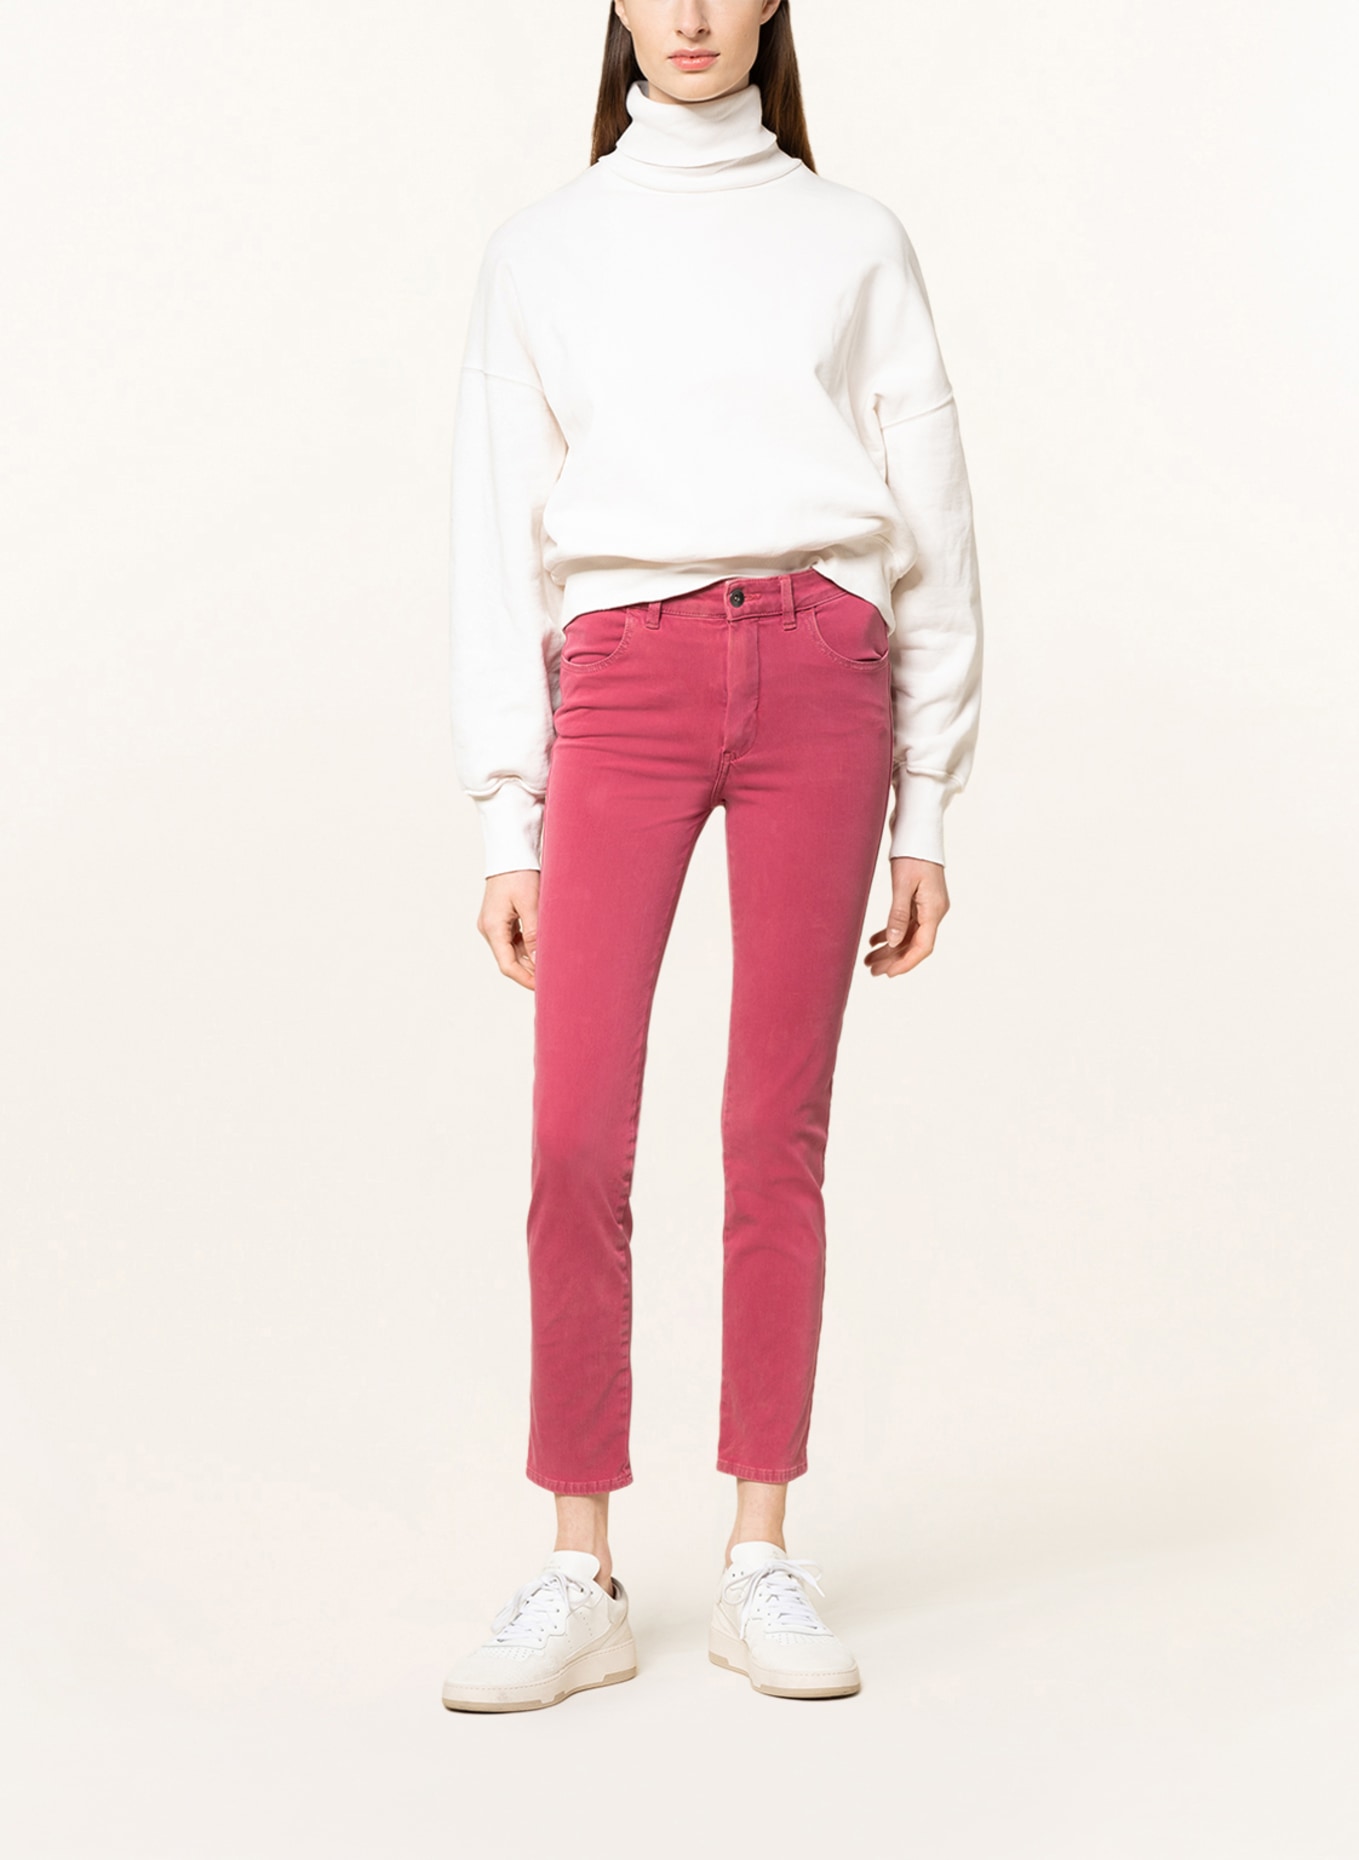 ITEM m6 7/8 skinny Jeans POWER PANTS with shaping effect, Color: 760 moody berry (Image 2)